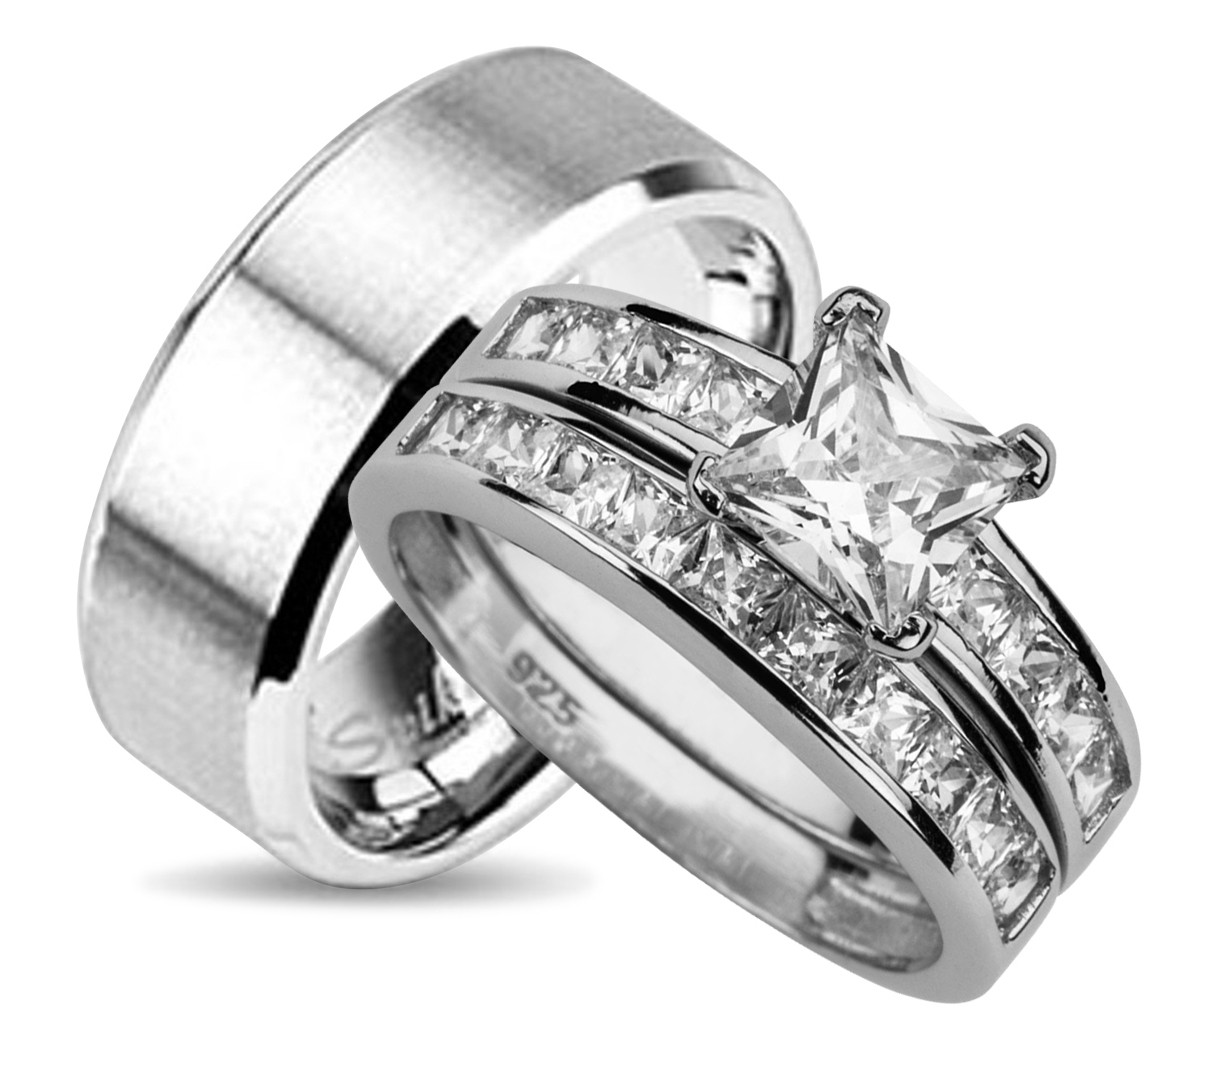 Cheap Matching Wedding Bands
 View Full Gallery of Beautiful Cheap Wedding Sets His and